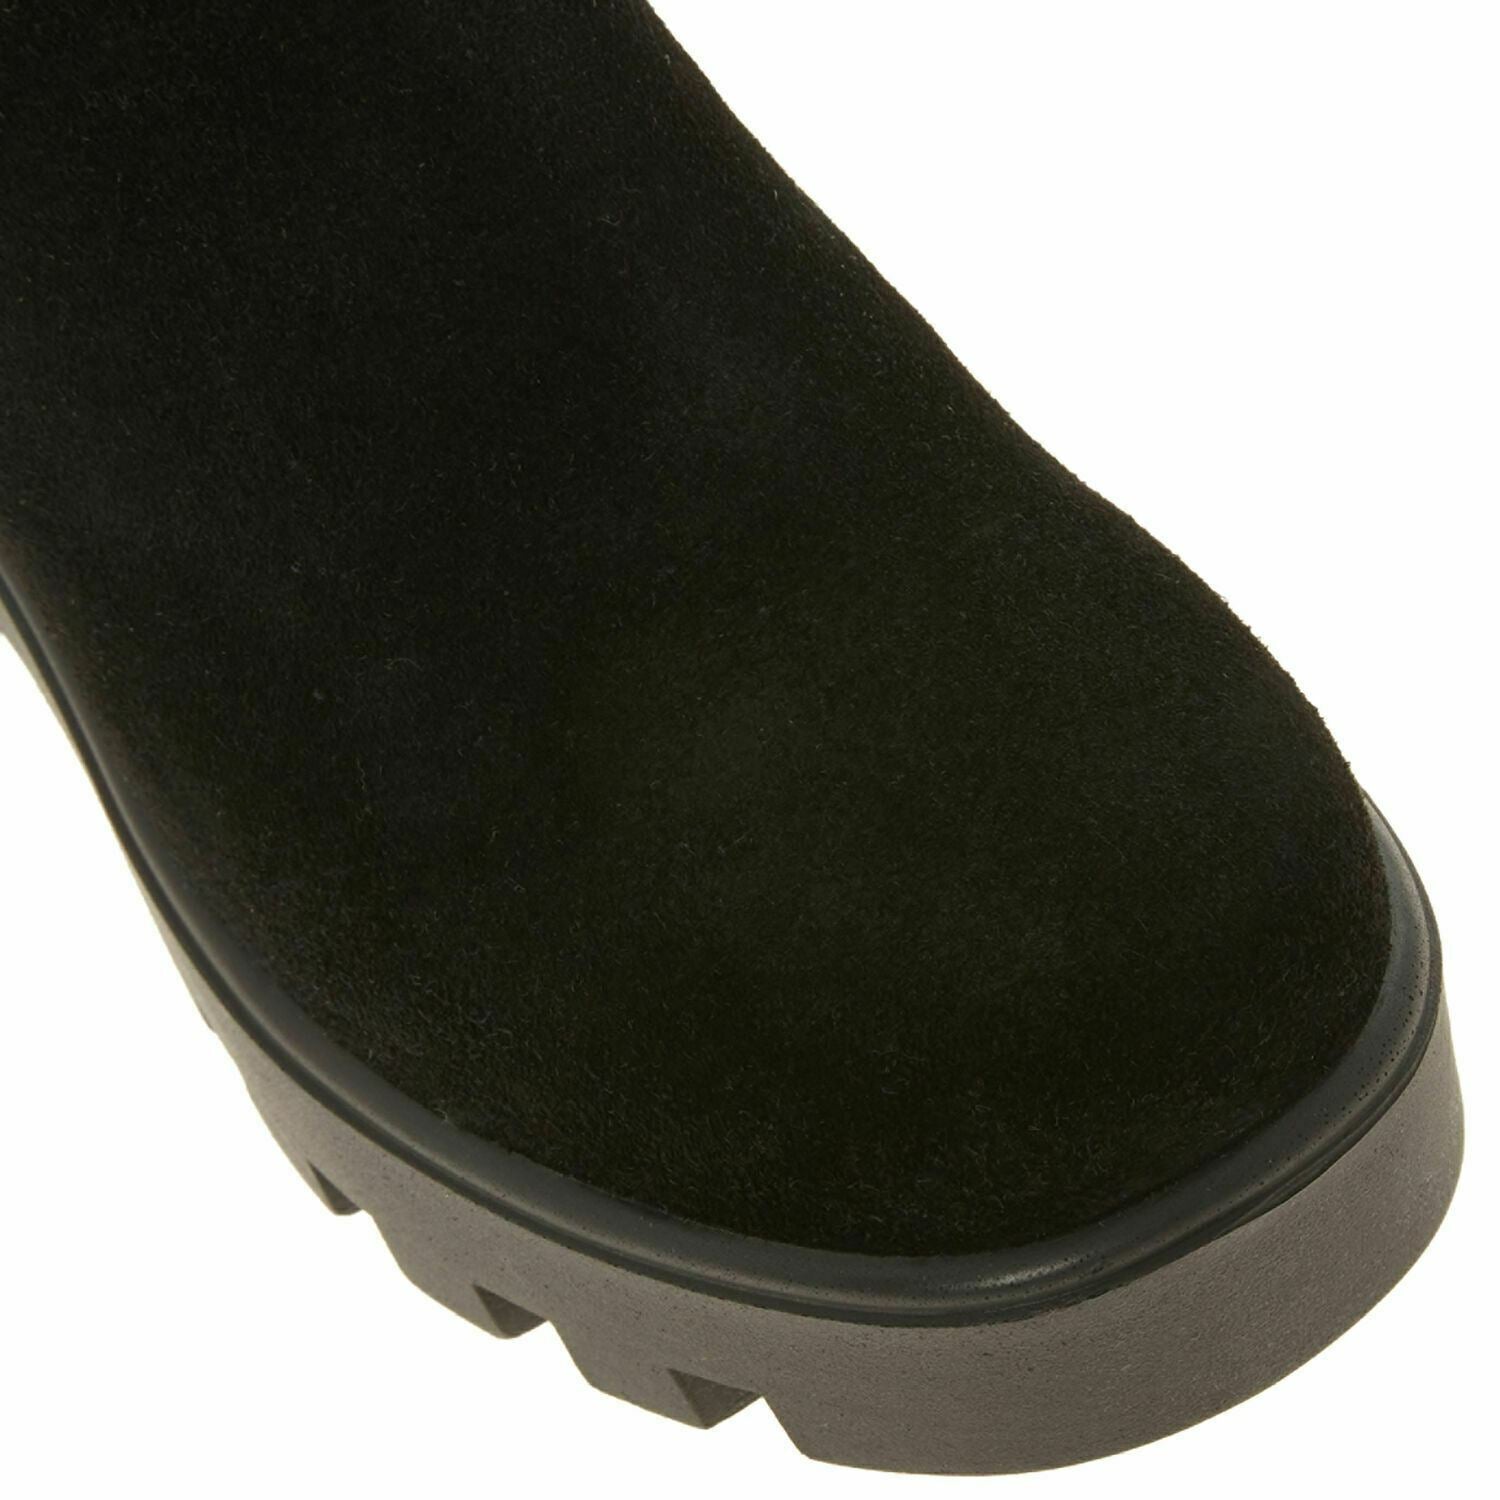 POLLINI Women's Suede Leather Chunky Ankle Slip On Boots, Black, size UK 4 EU 37